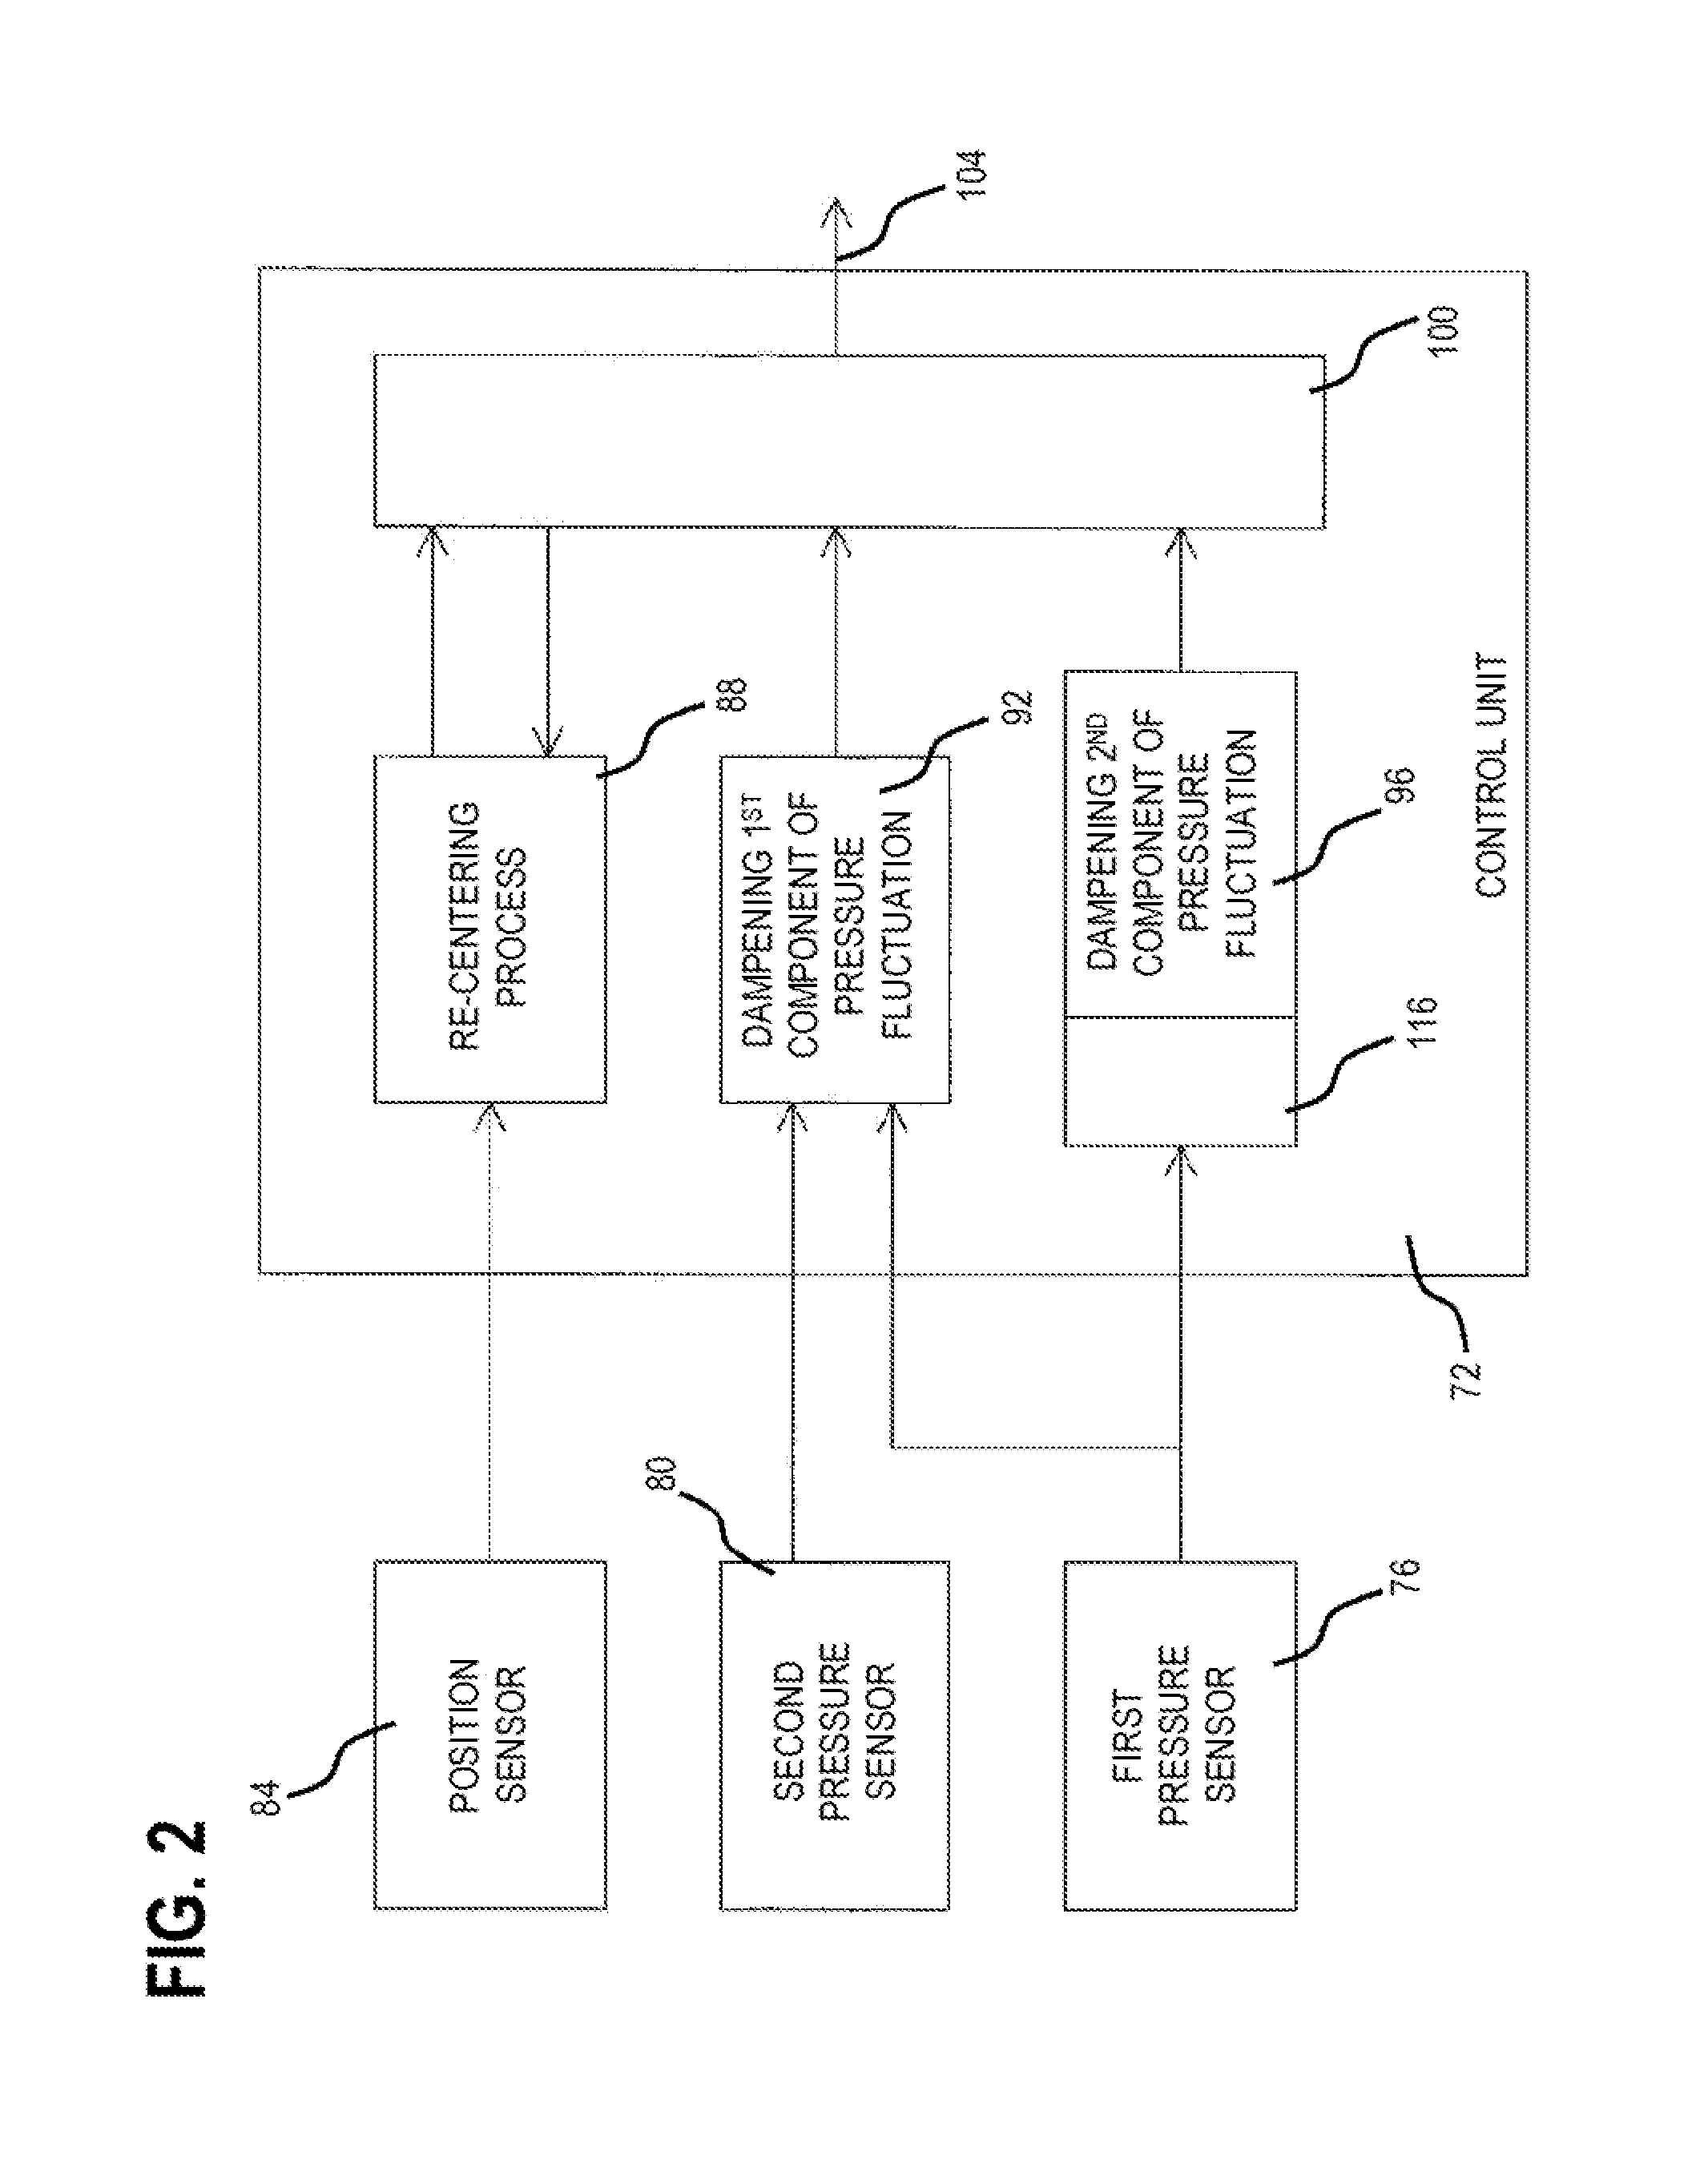 Method of dampening pressure pulsations in a working fluid within a conduit